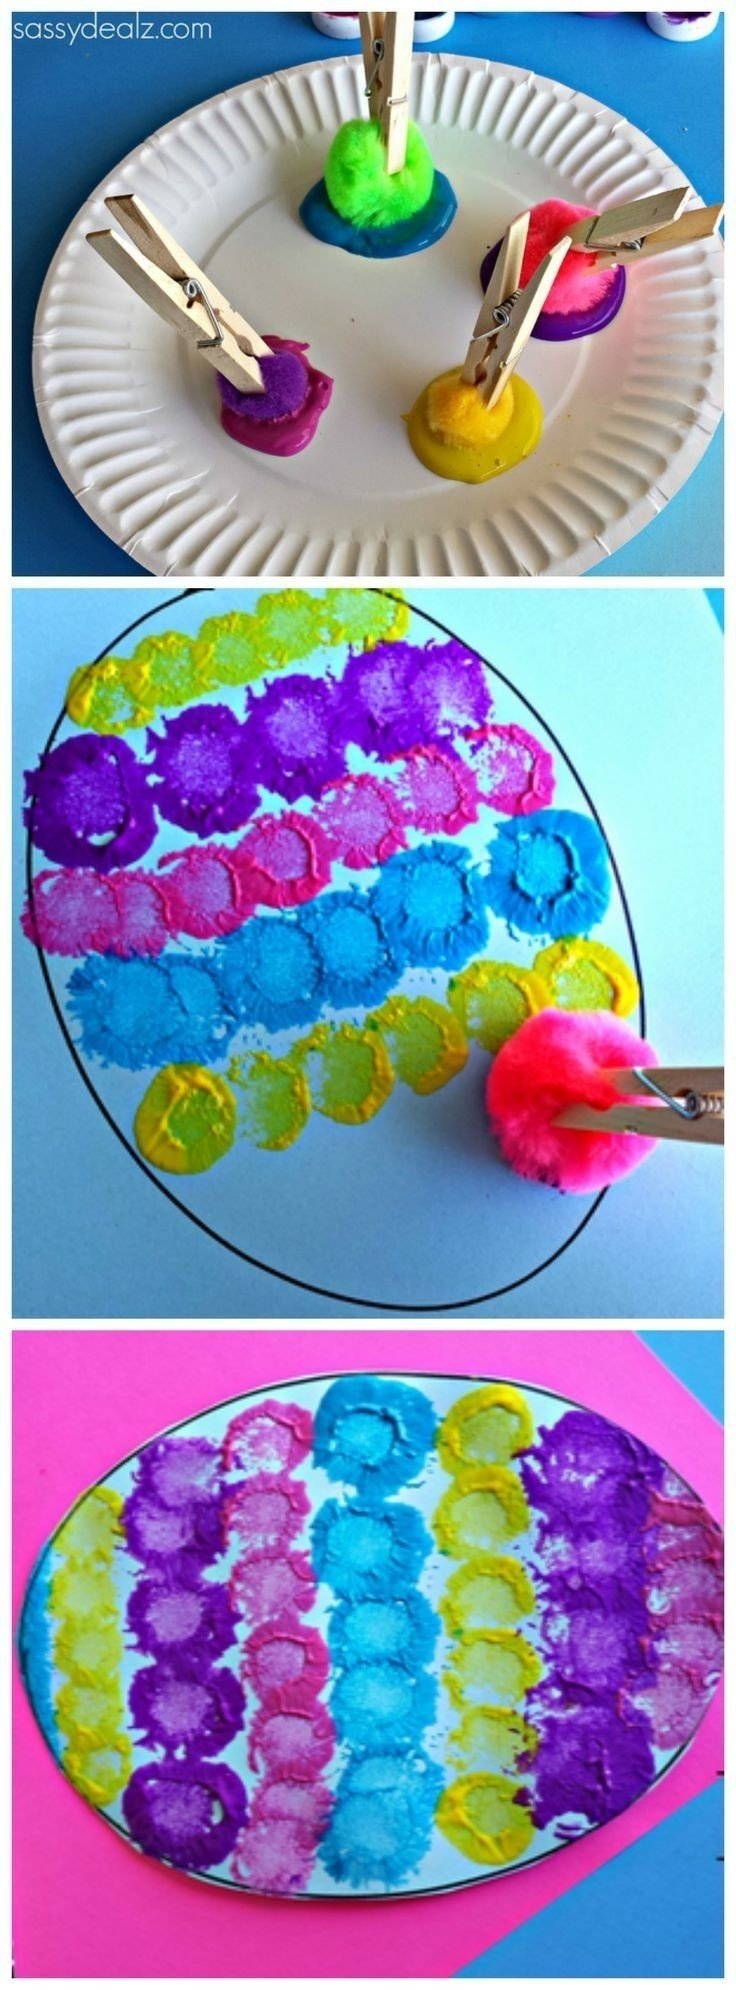 10 Fashionable Easter Arts And Crafts Ideas easter arts and crafts ideas for children find craft ideas 2023